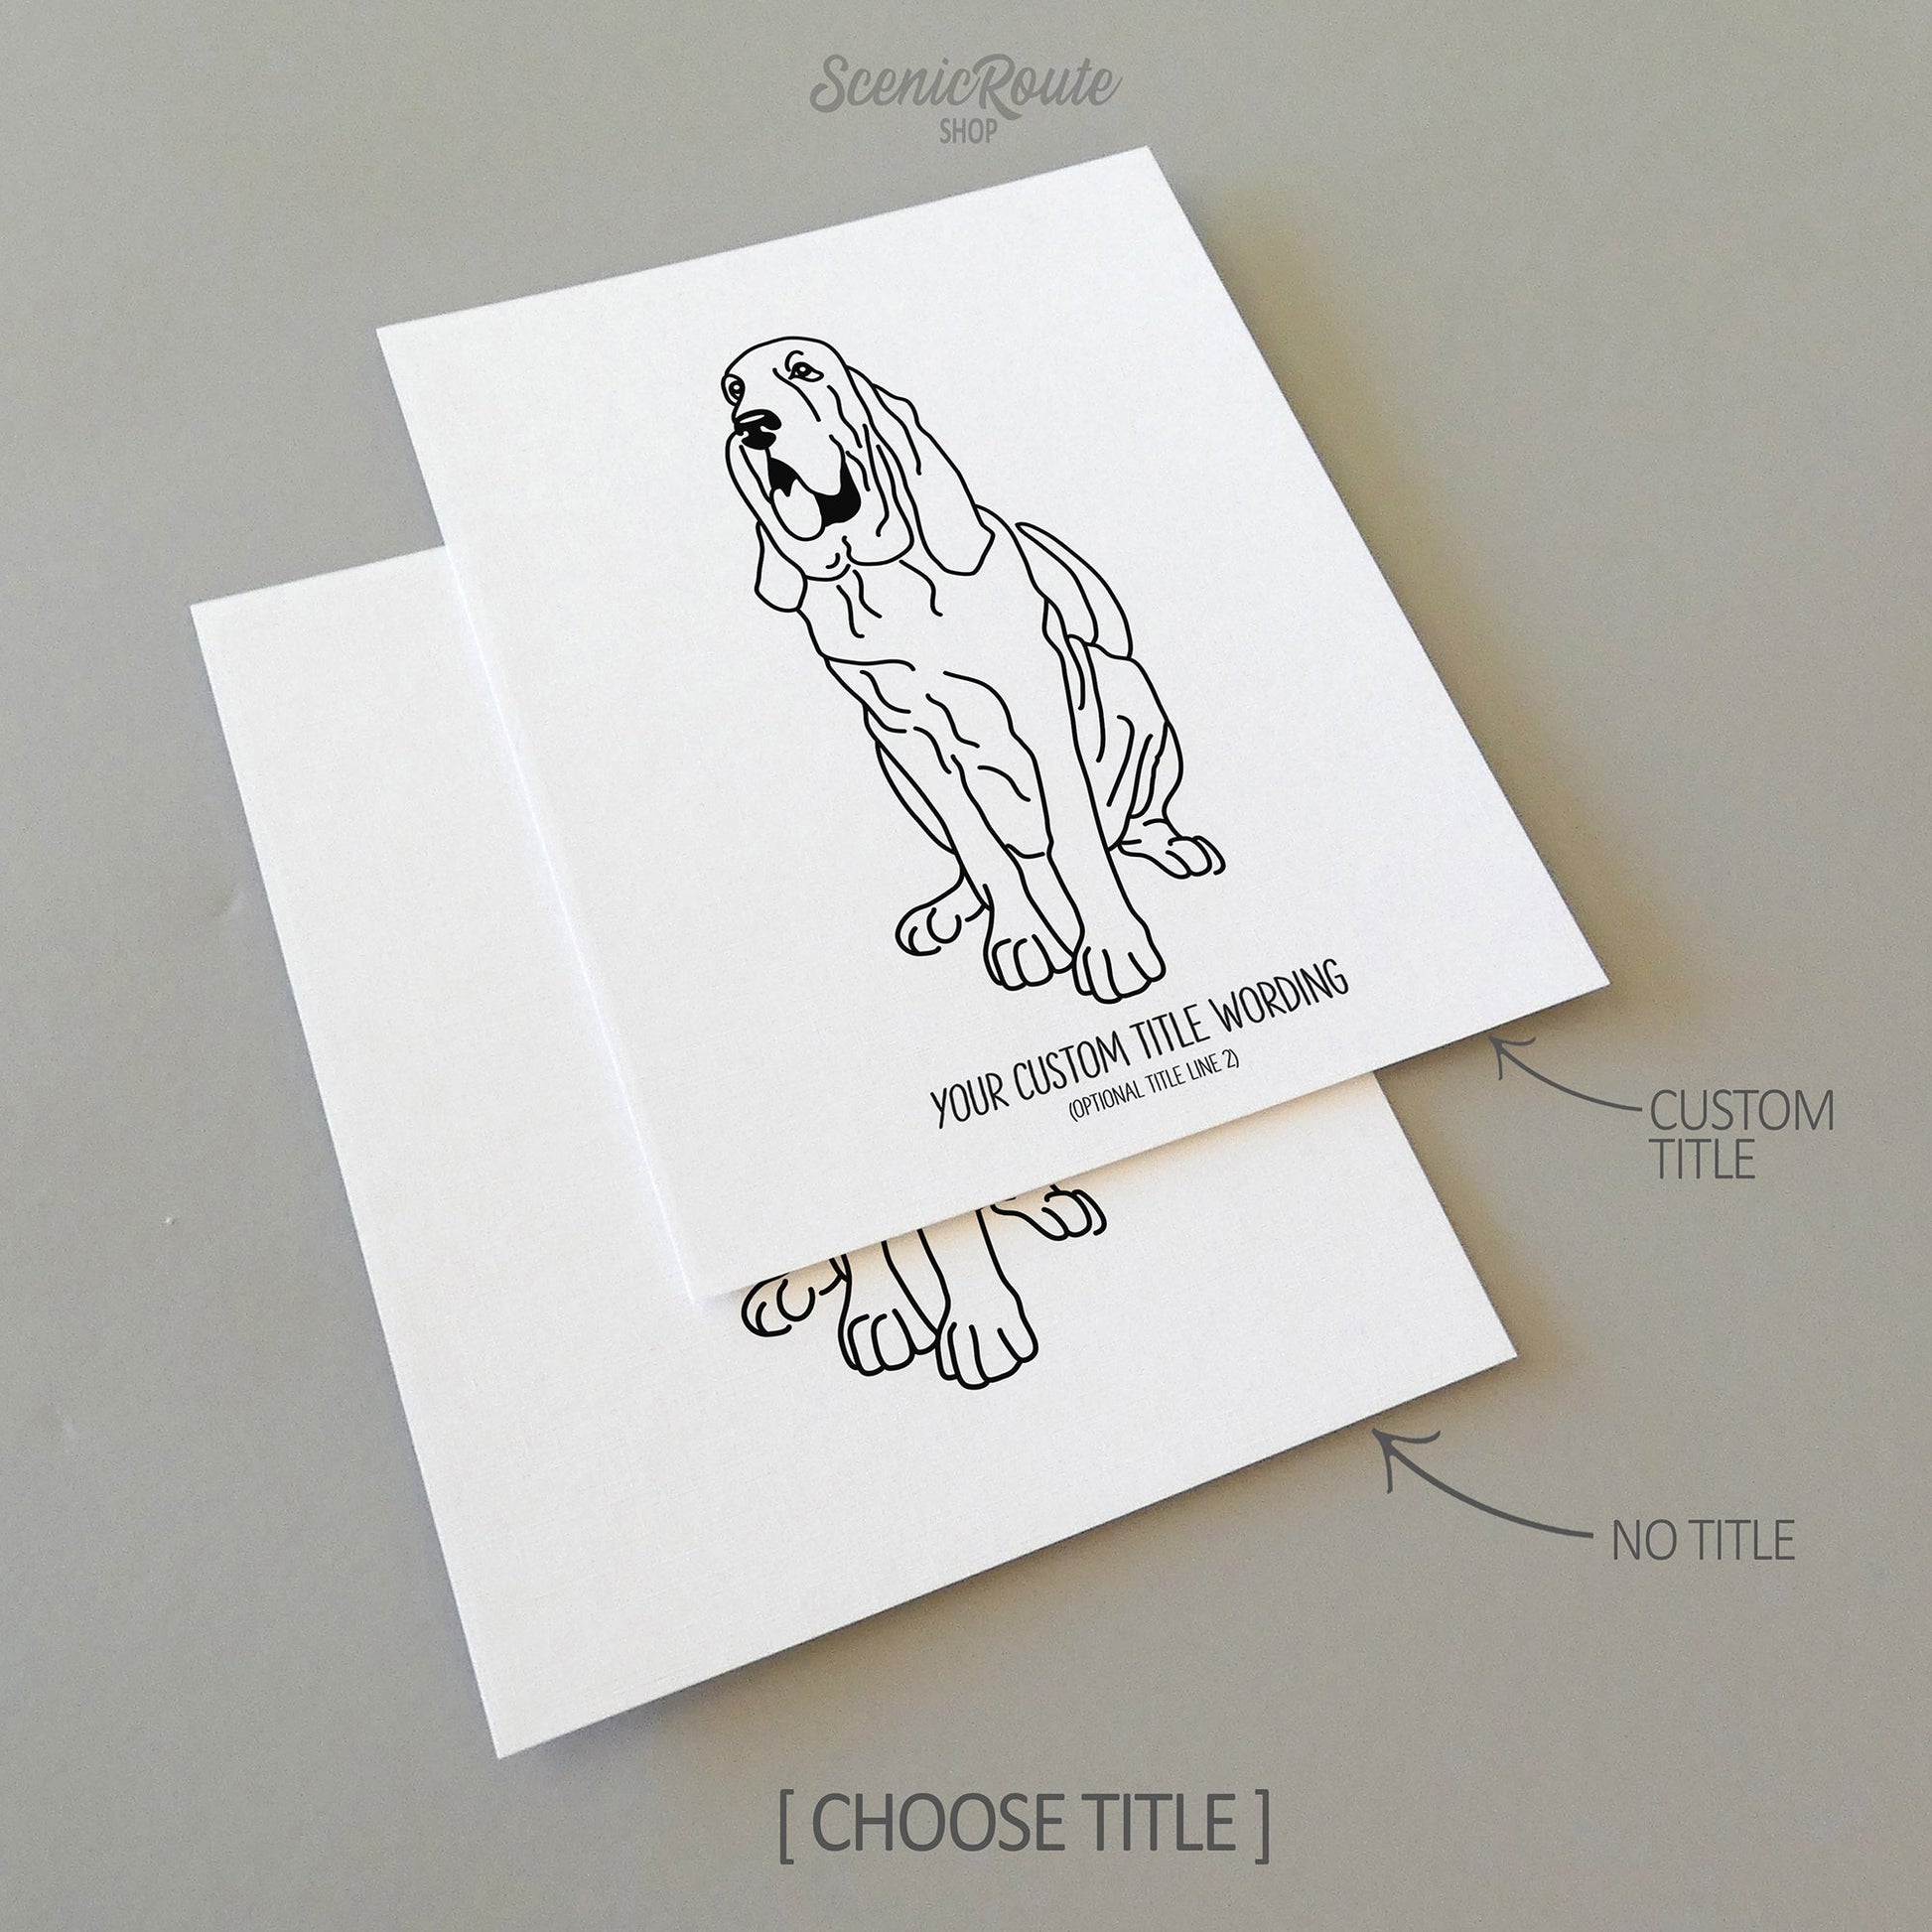 Two drawings of a Bloodhound dog on white linen paper with a gray background.  Pieces are shown with “No Title” and “Custom Title” options to illustrate the available art print options.